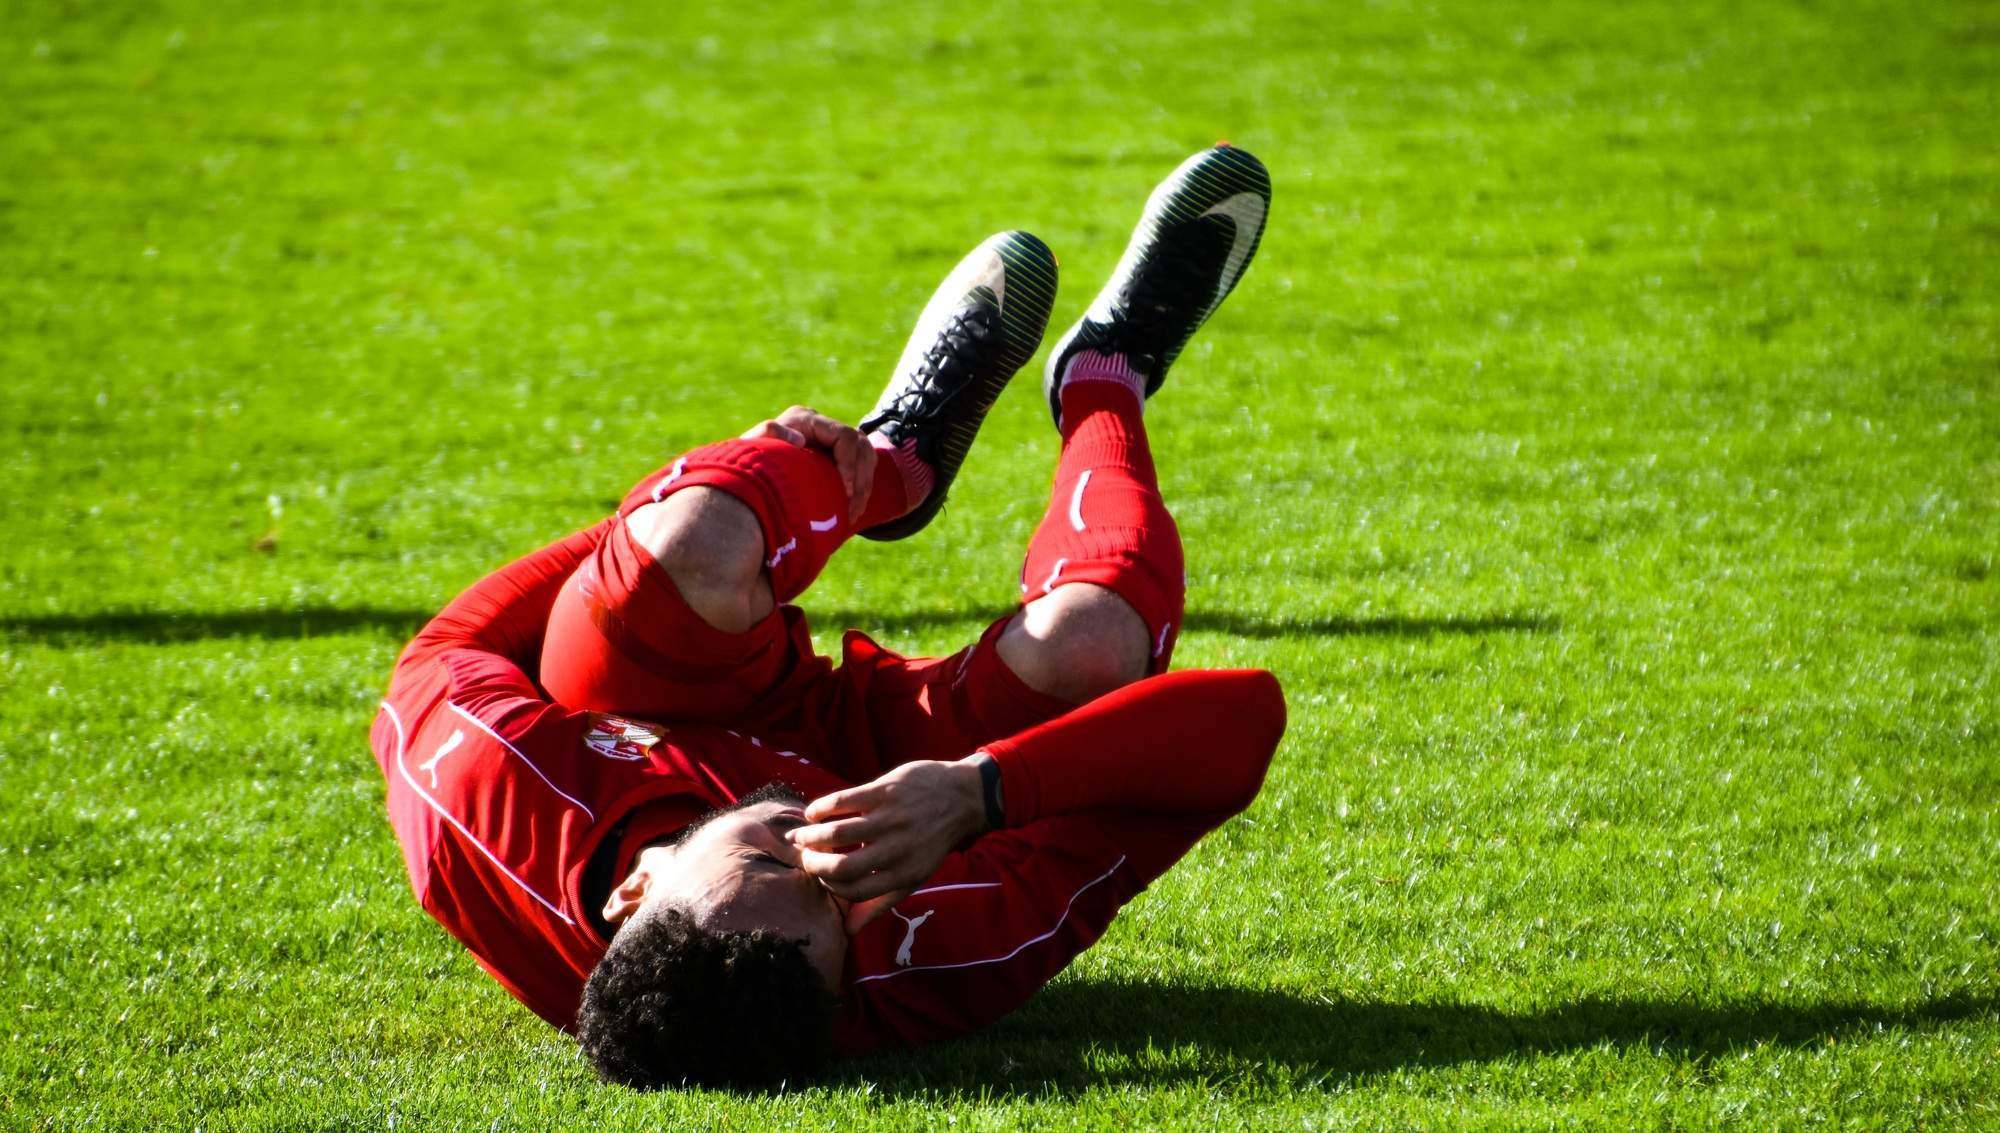 Three Most Common Sports Injuries and How They’re Treated